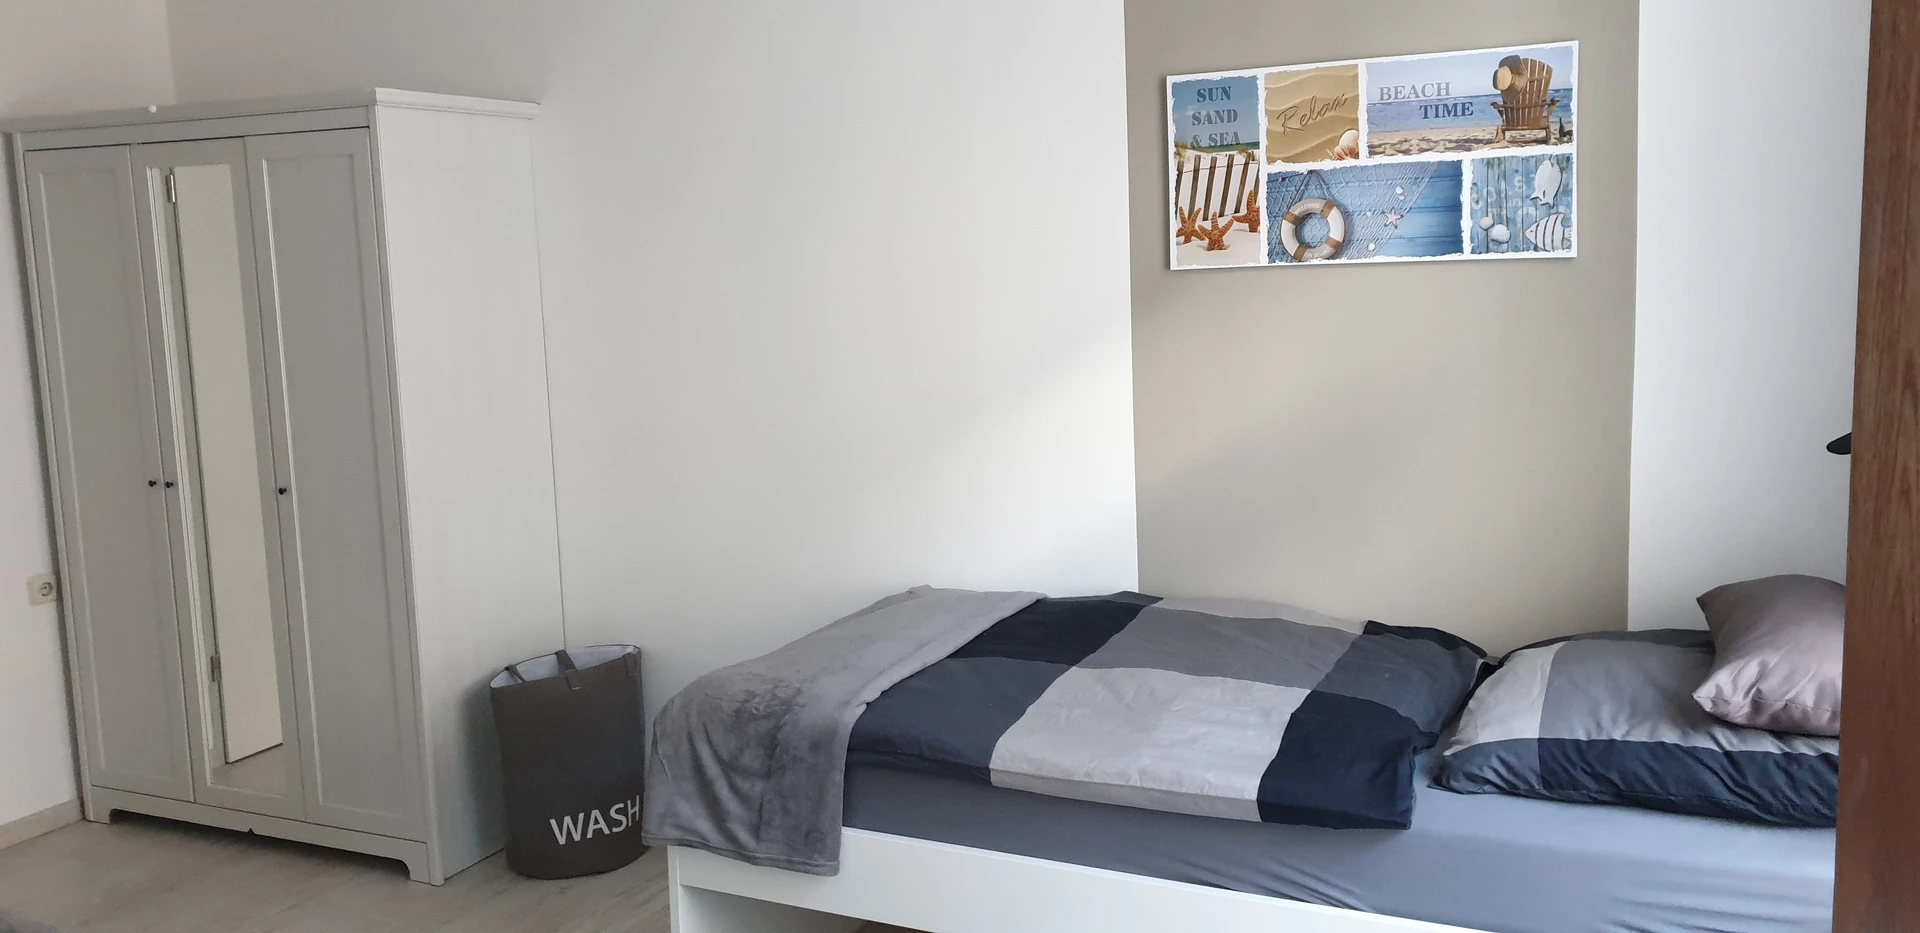 Room for rent in a shared flat in Bochum